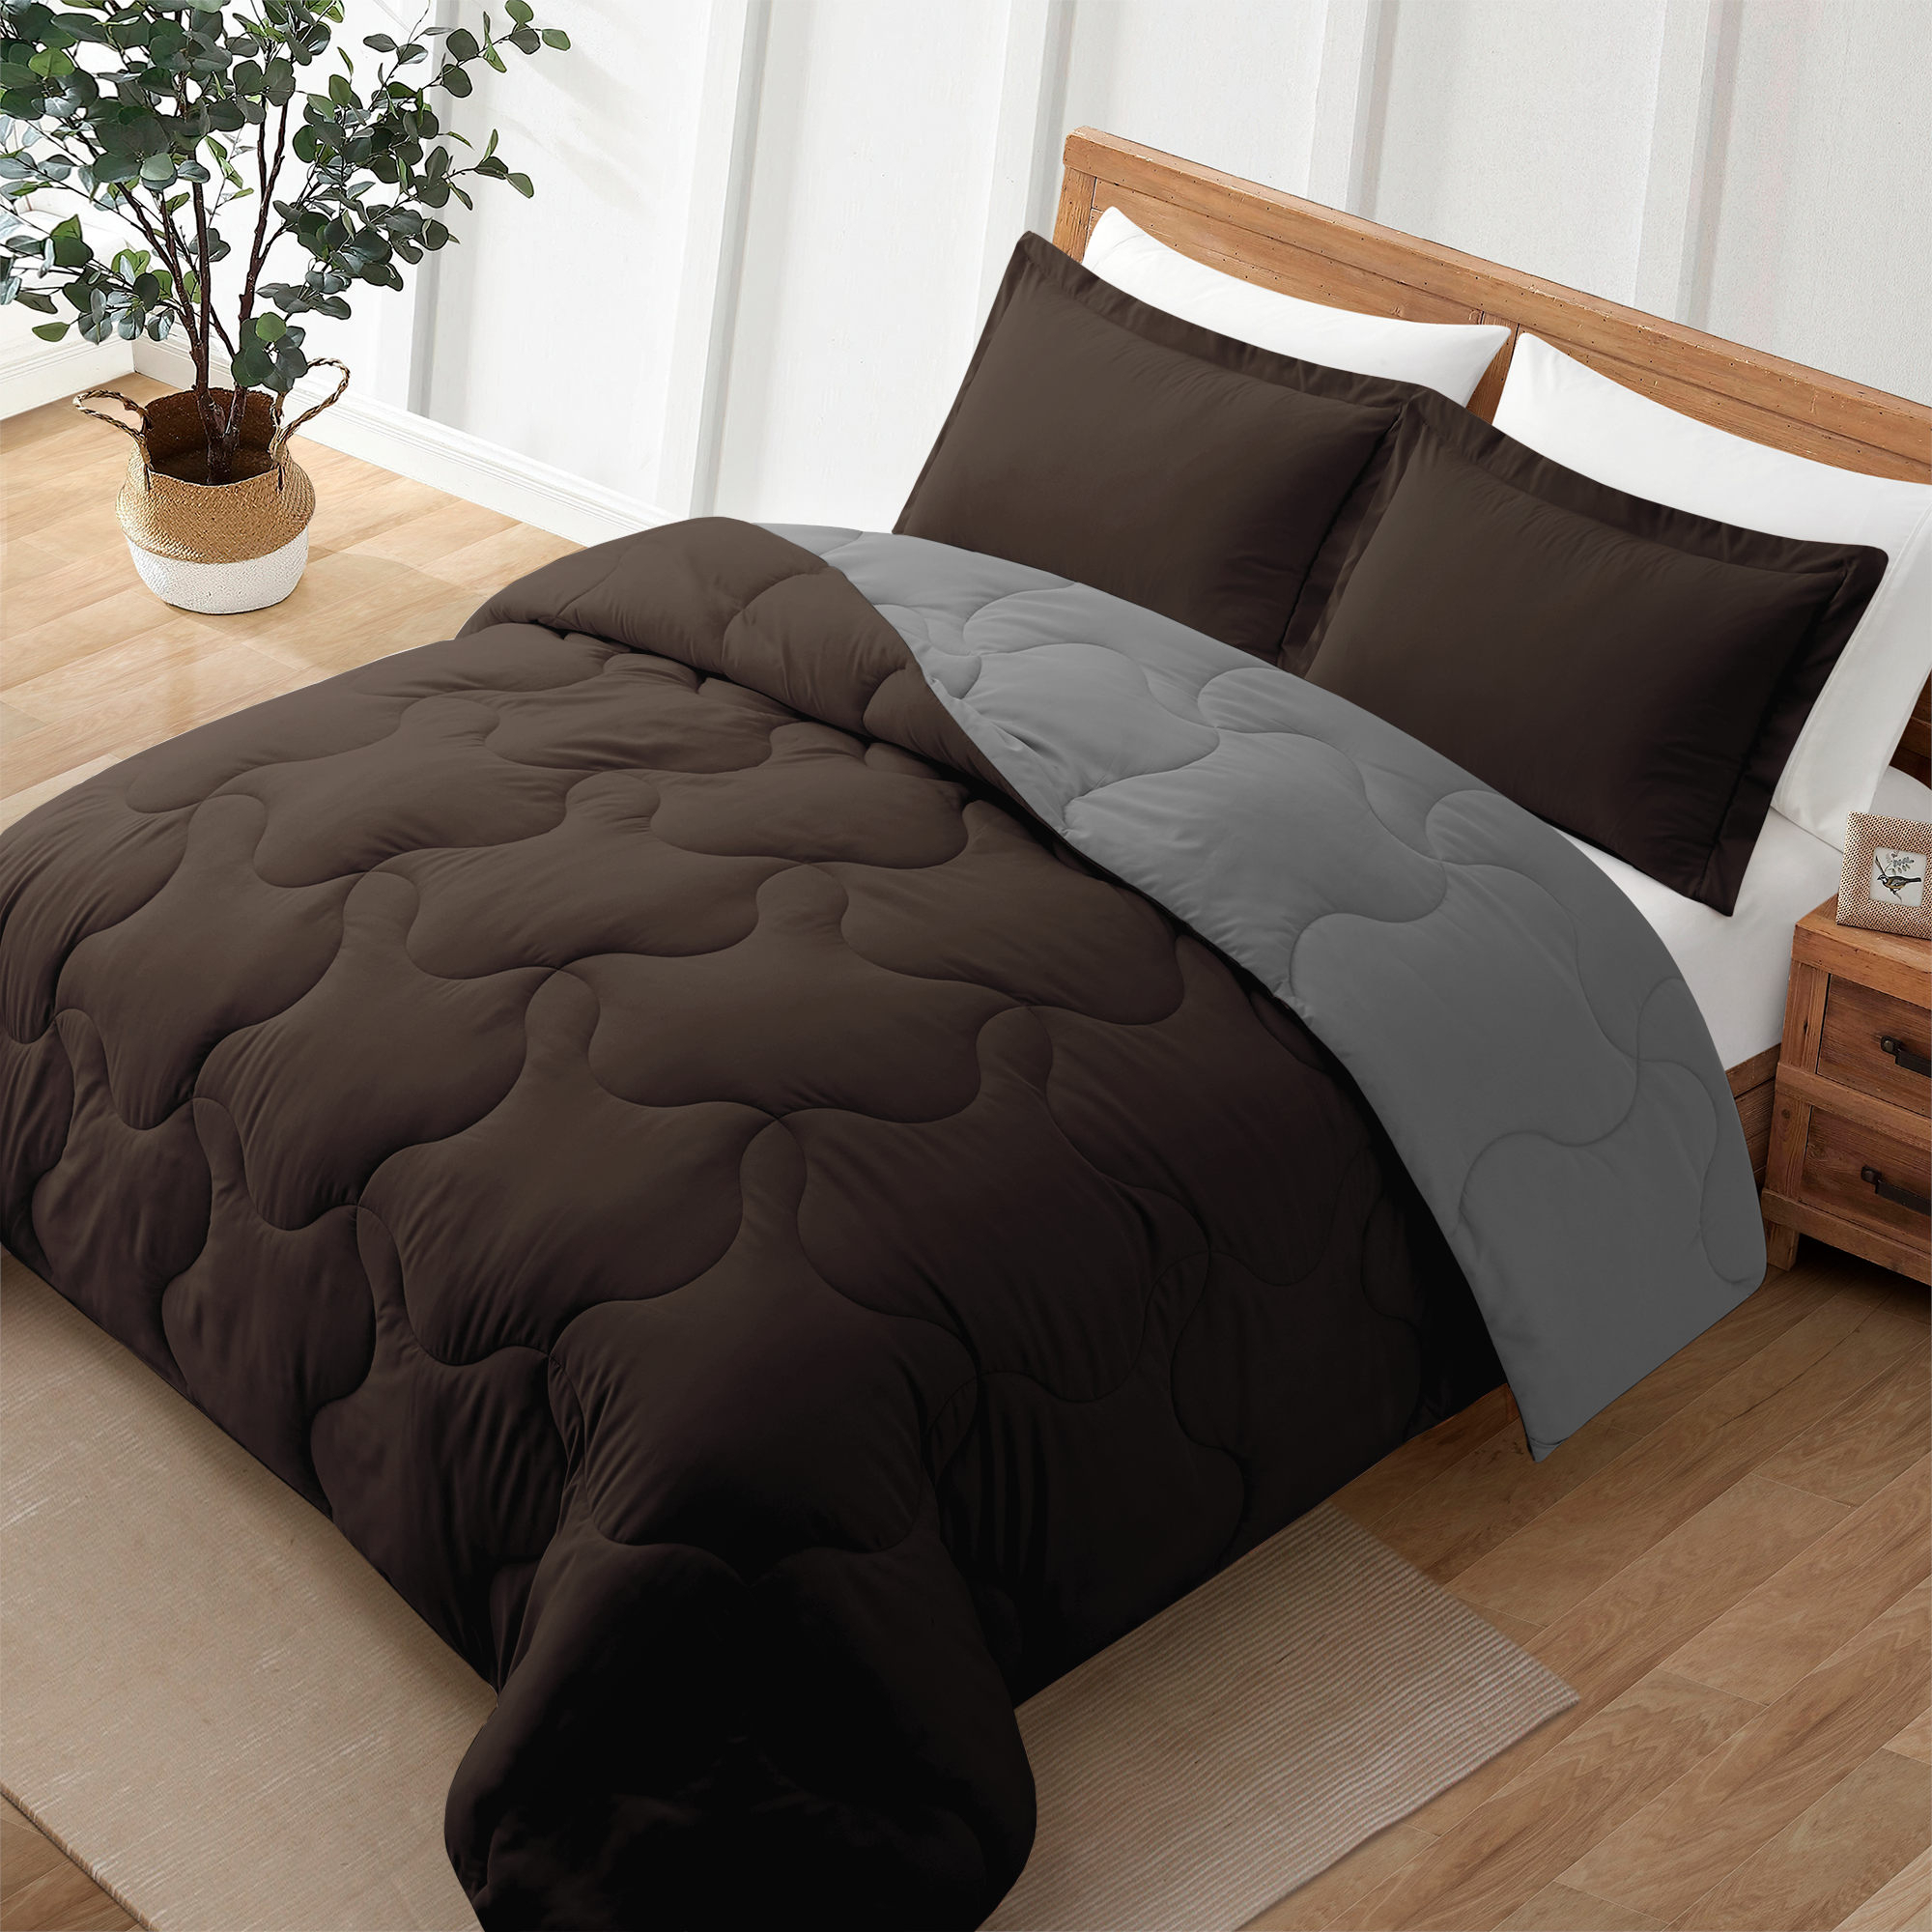 3 or 2 Pieces Lightweight Reversible Comforter Set with Pillow Shams - Coffee/Dark Grey, Twin